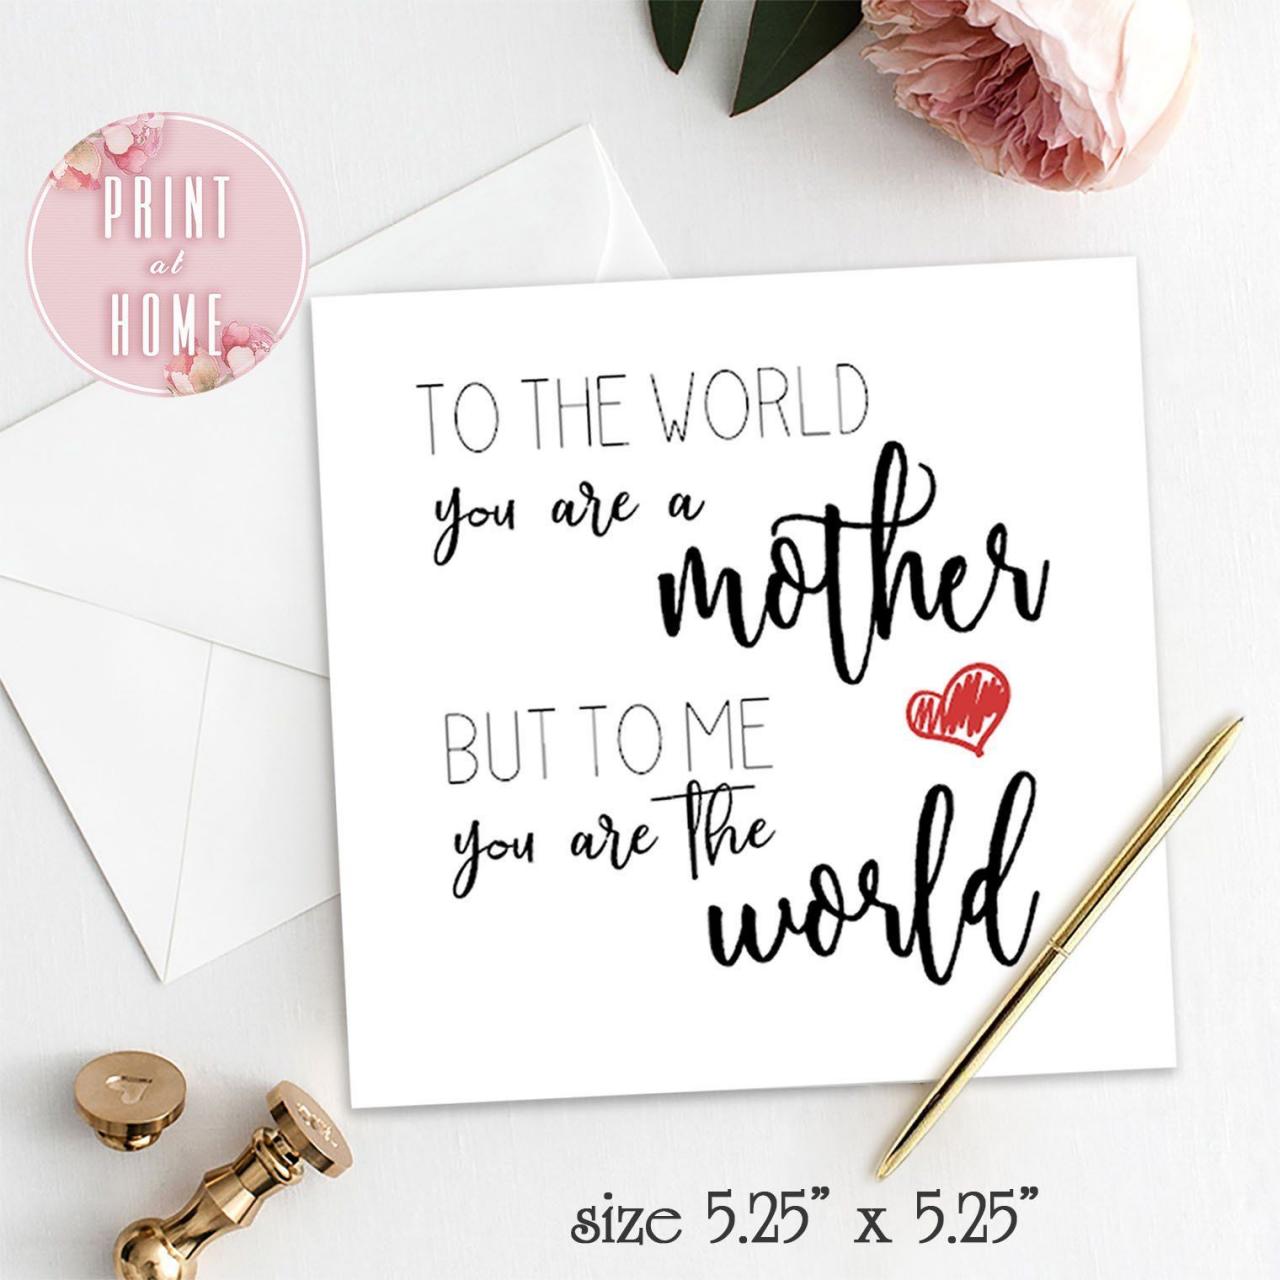 Pin by Lilla Szászfai on crafting in 2020 | Diy birthday cards for mom ...